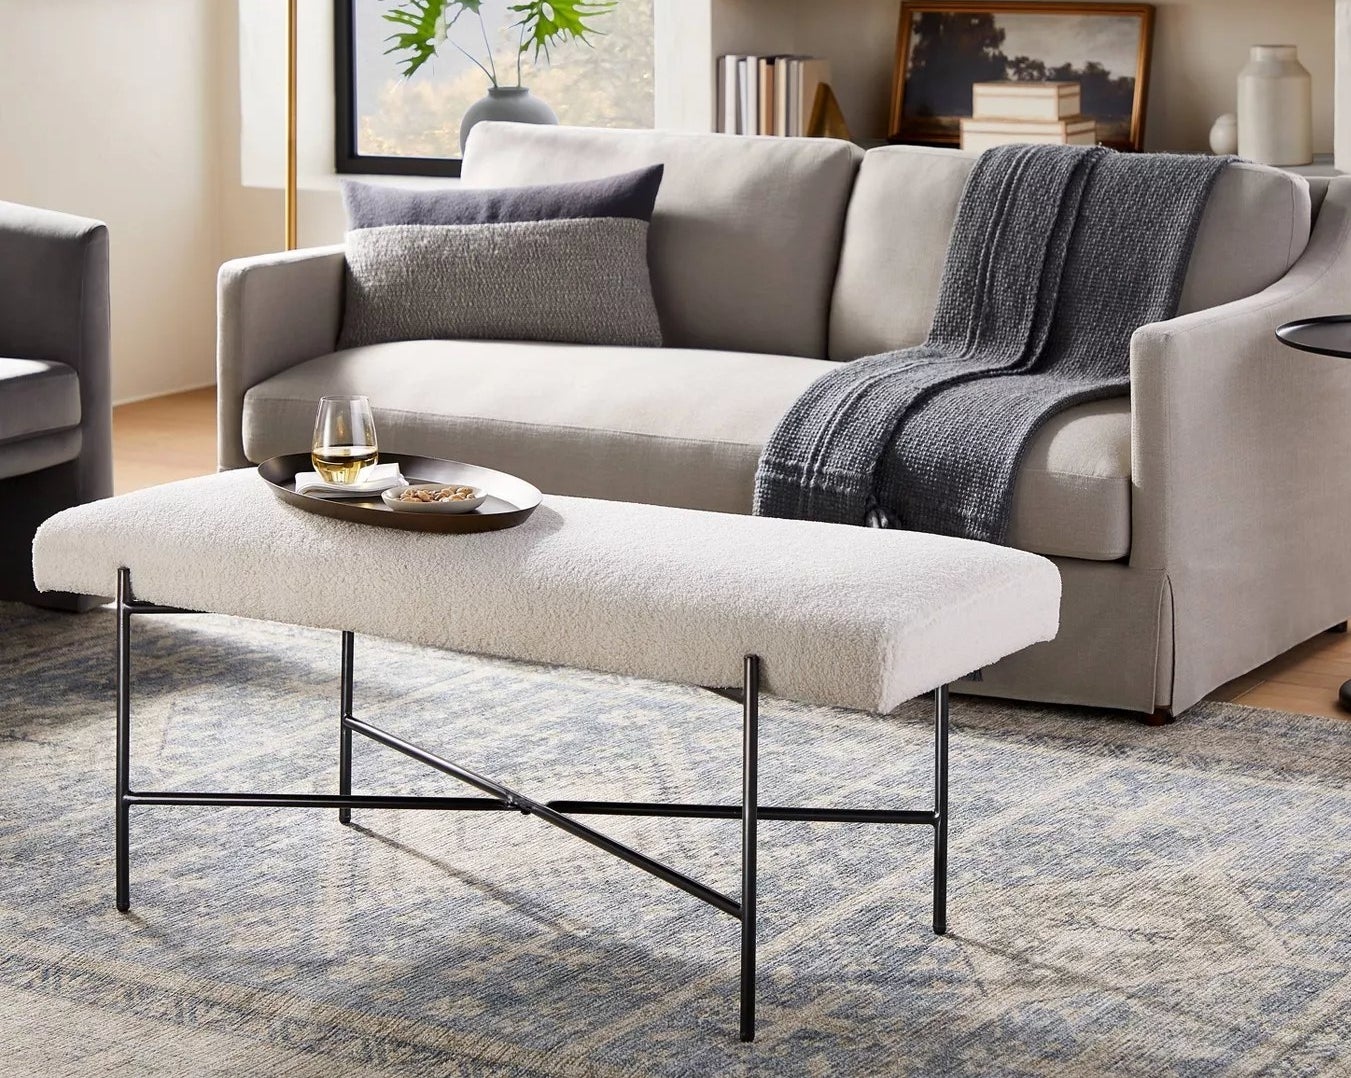 The boucle bench with black legs acting as a table in a living room